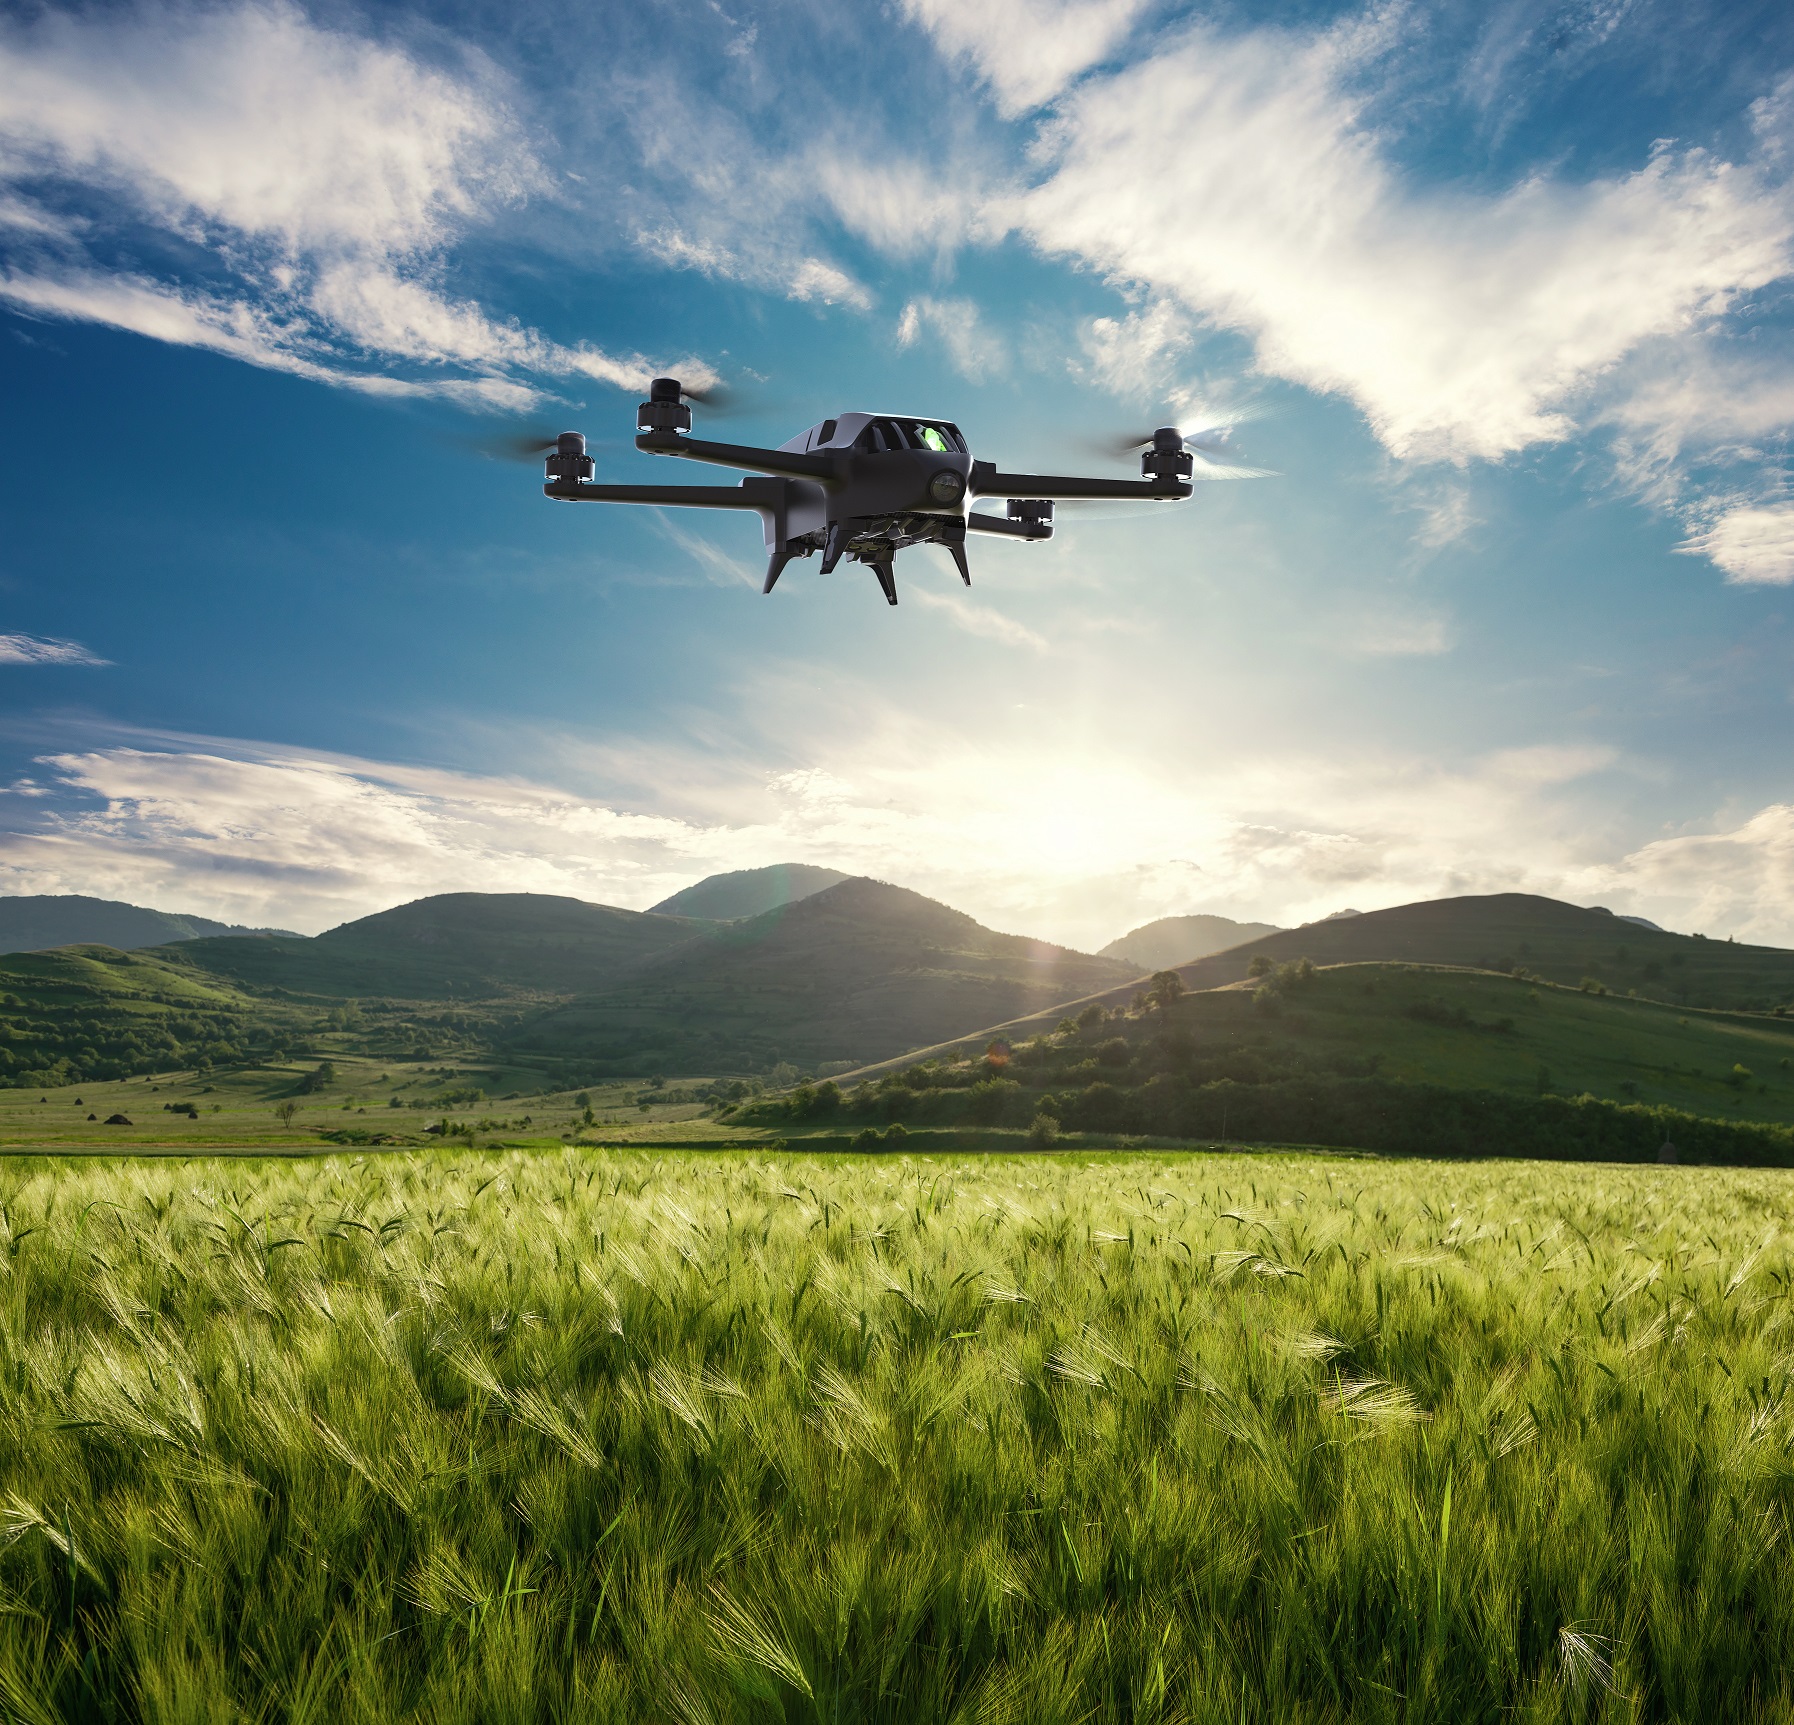 Drone Rentals Increasing in Agriculture Equipment